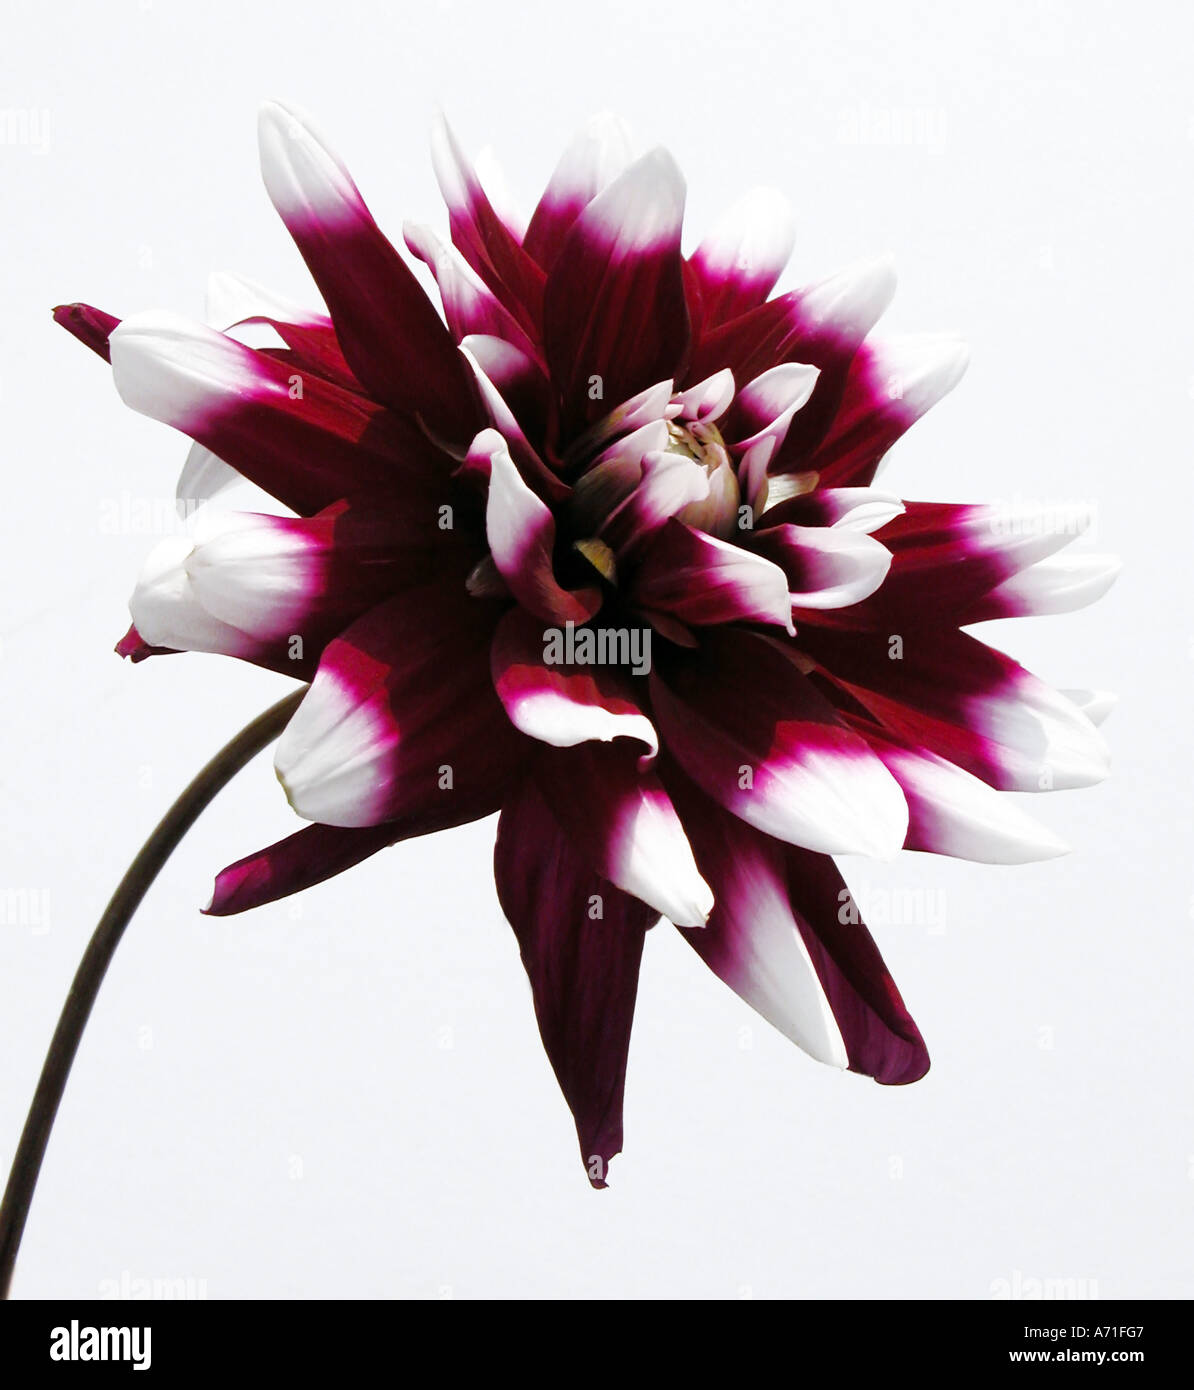 Close up of a Dahlia flower on a white background. Stock Photo